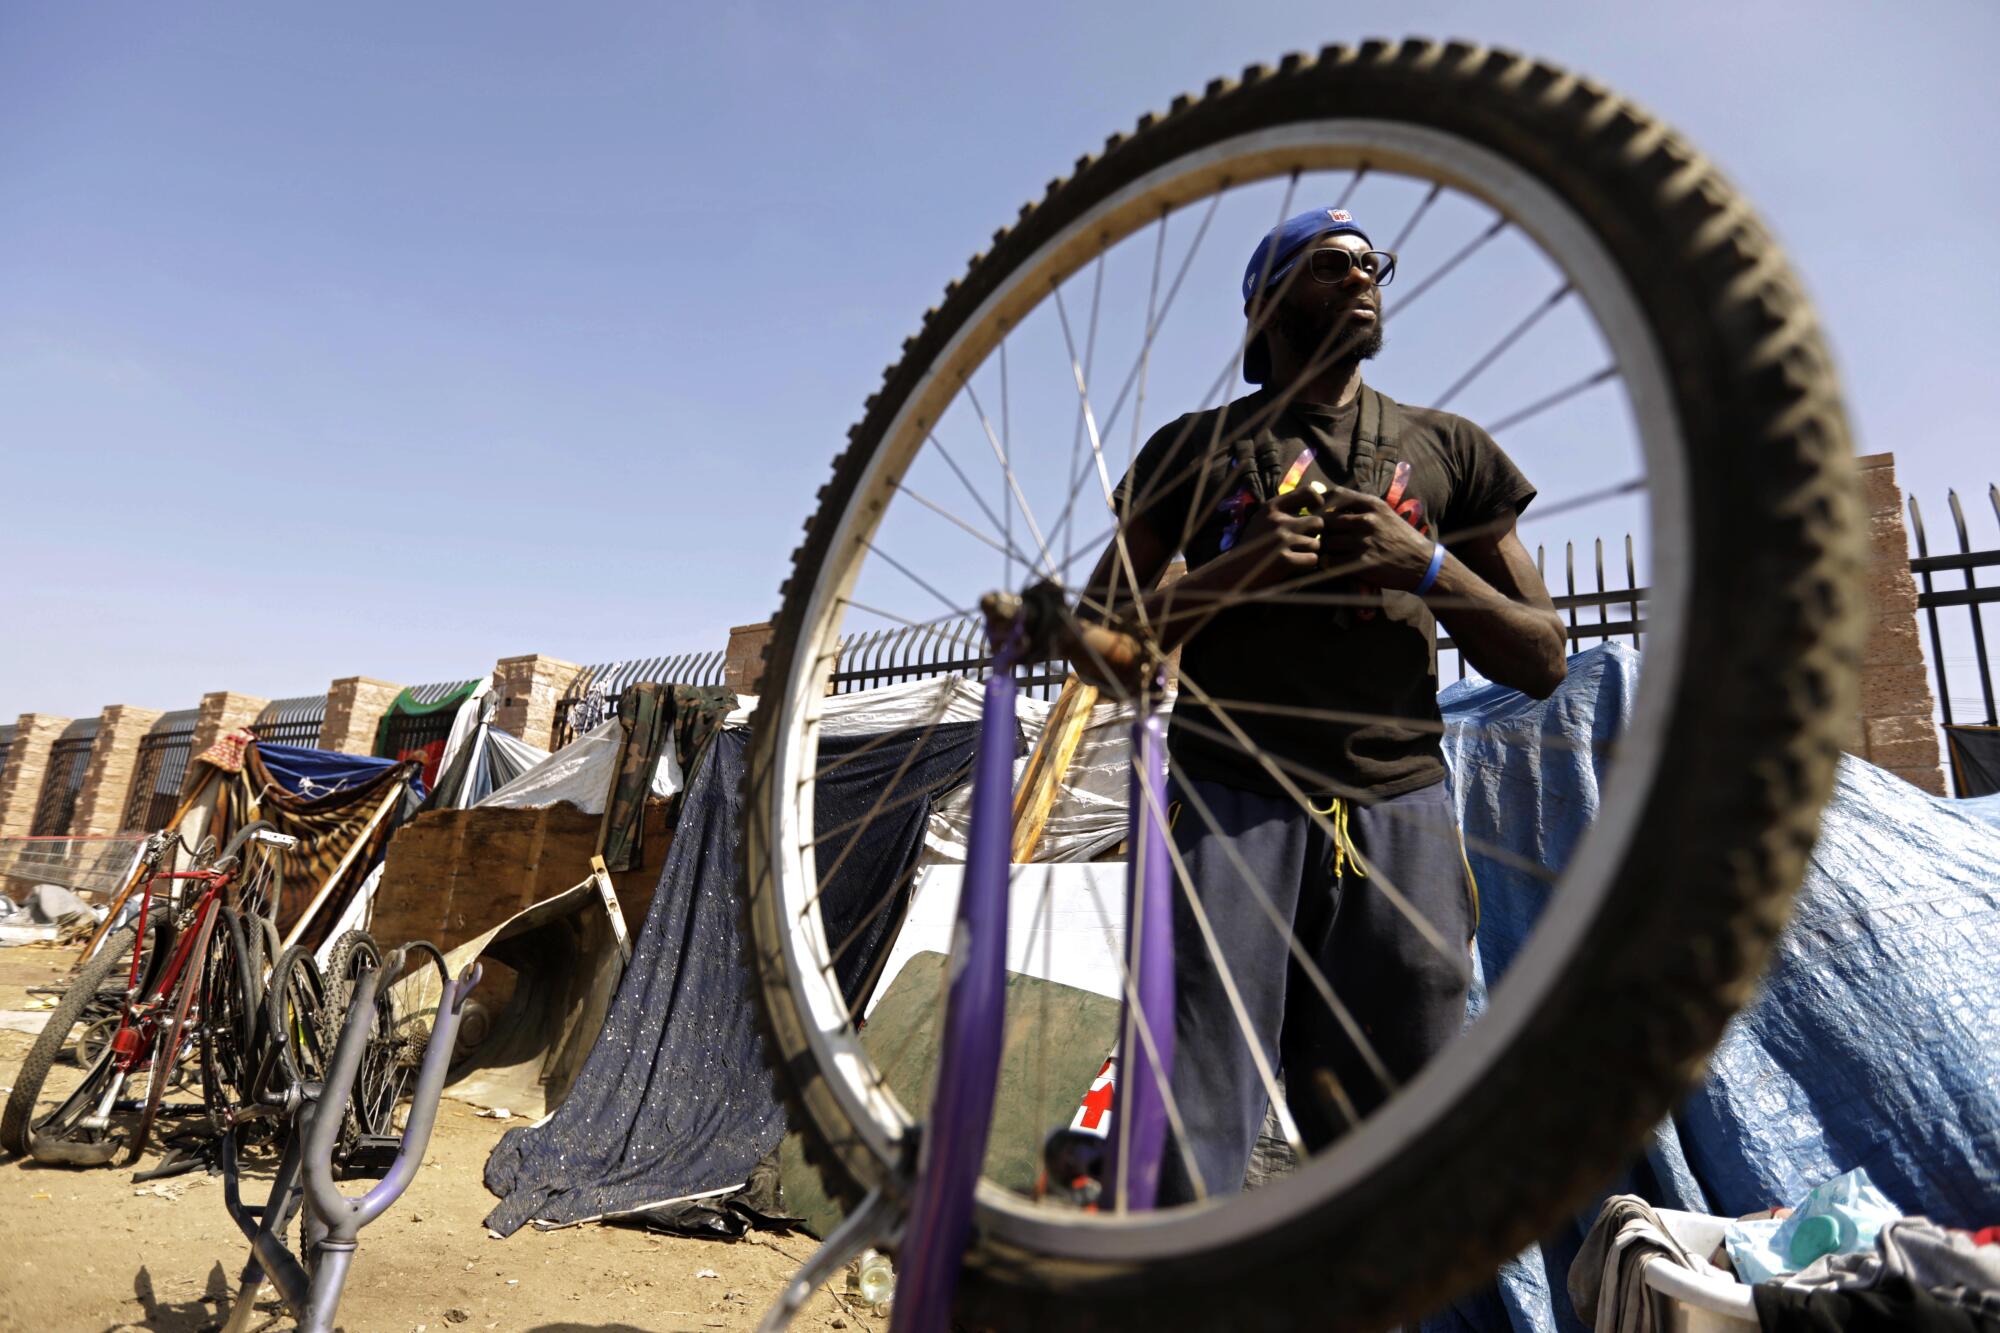 Desmond Perkins, who is homeless, prepares to work on bikes he stores in a section of a 10-acre vacant lot in Watts.